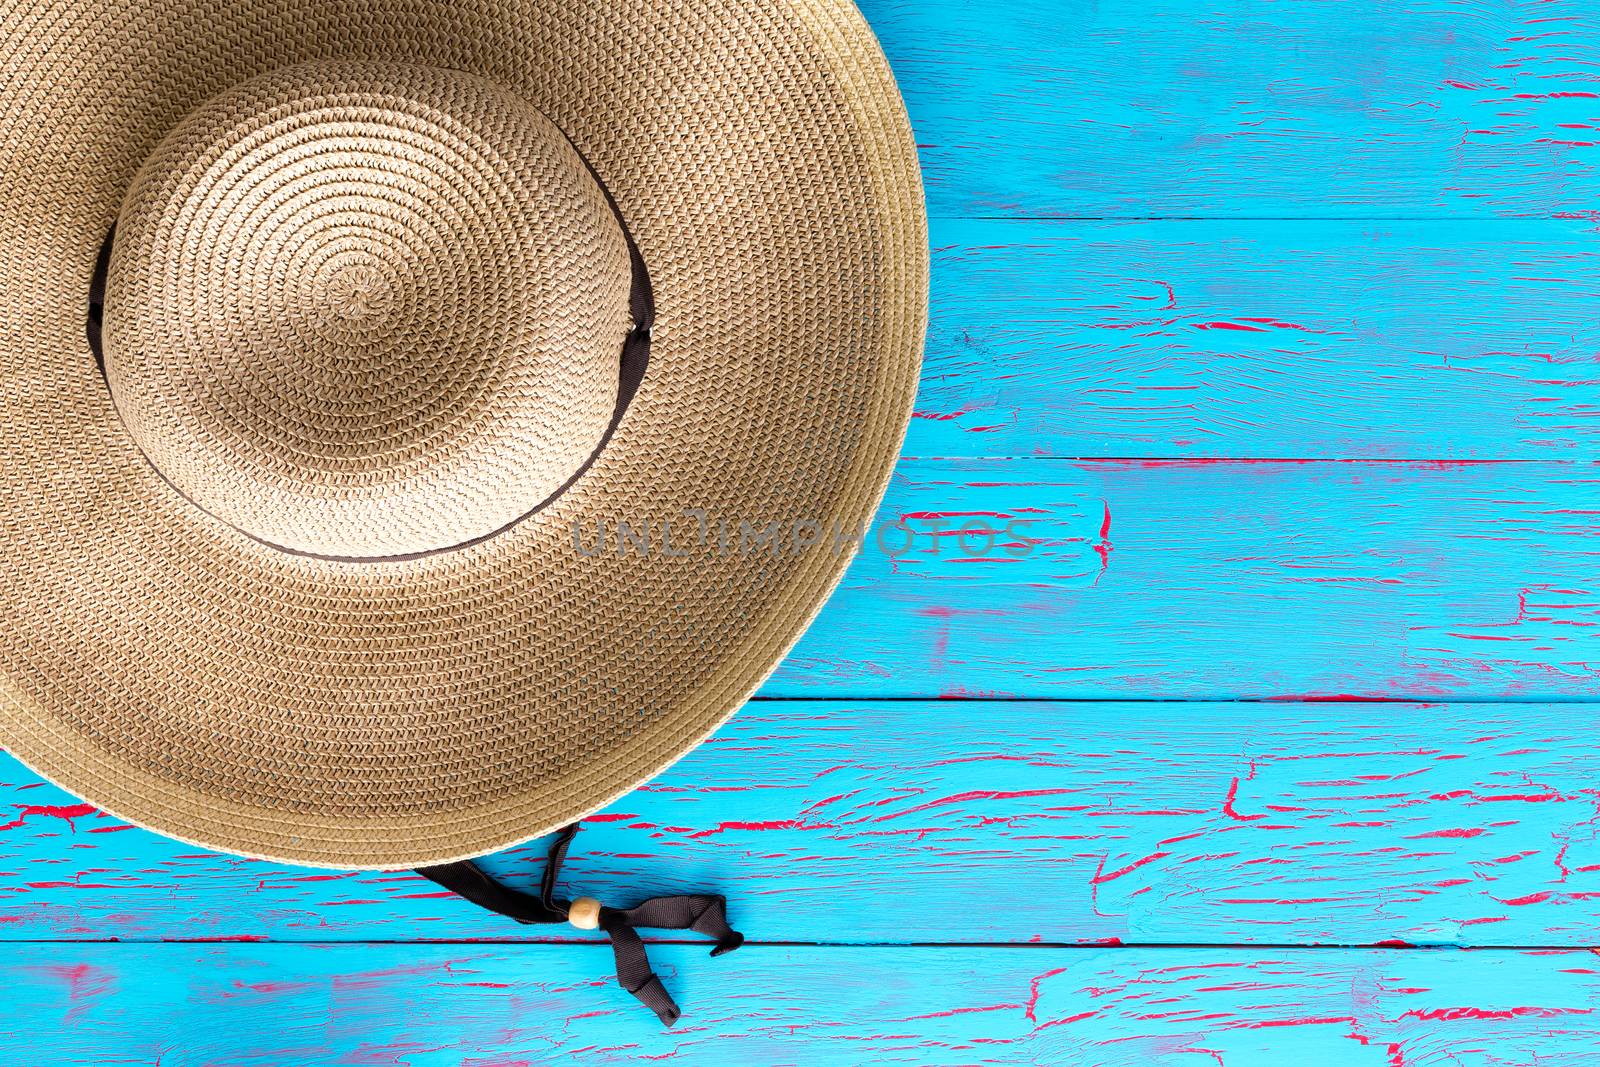 Wide brimmed straw gardening hat on a picnic table by coskun